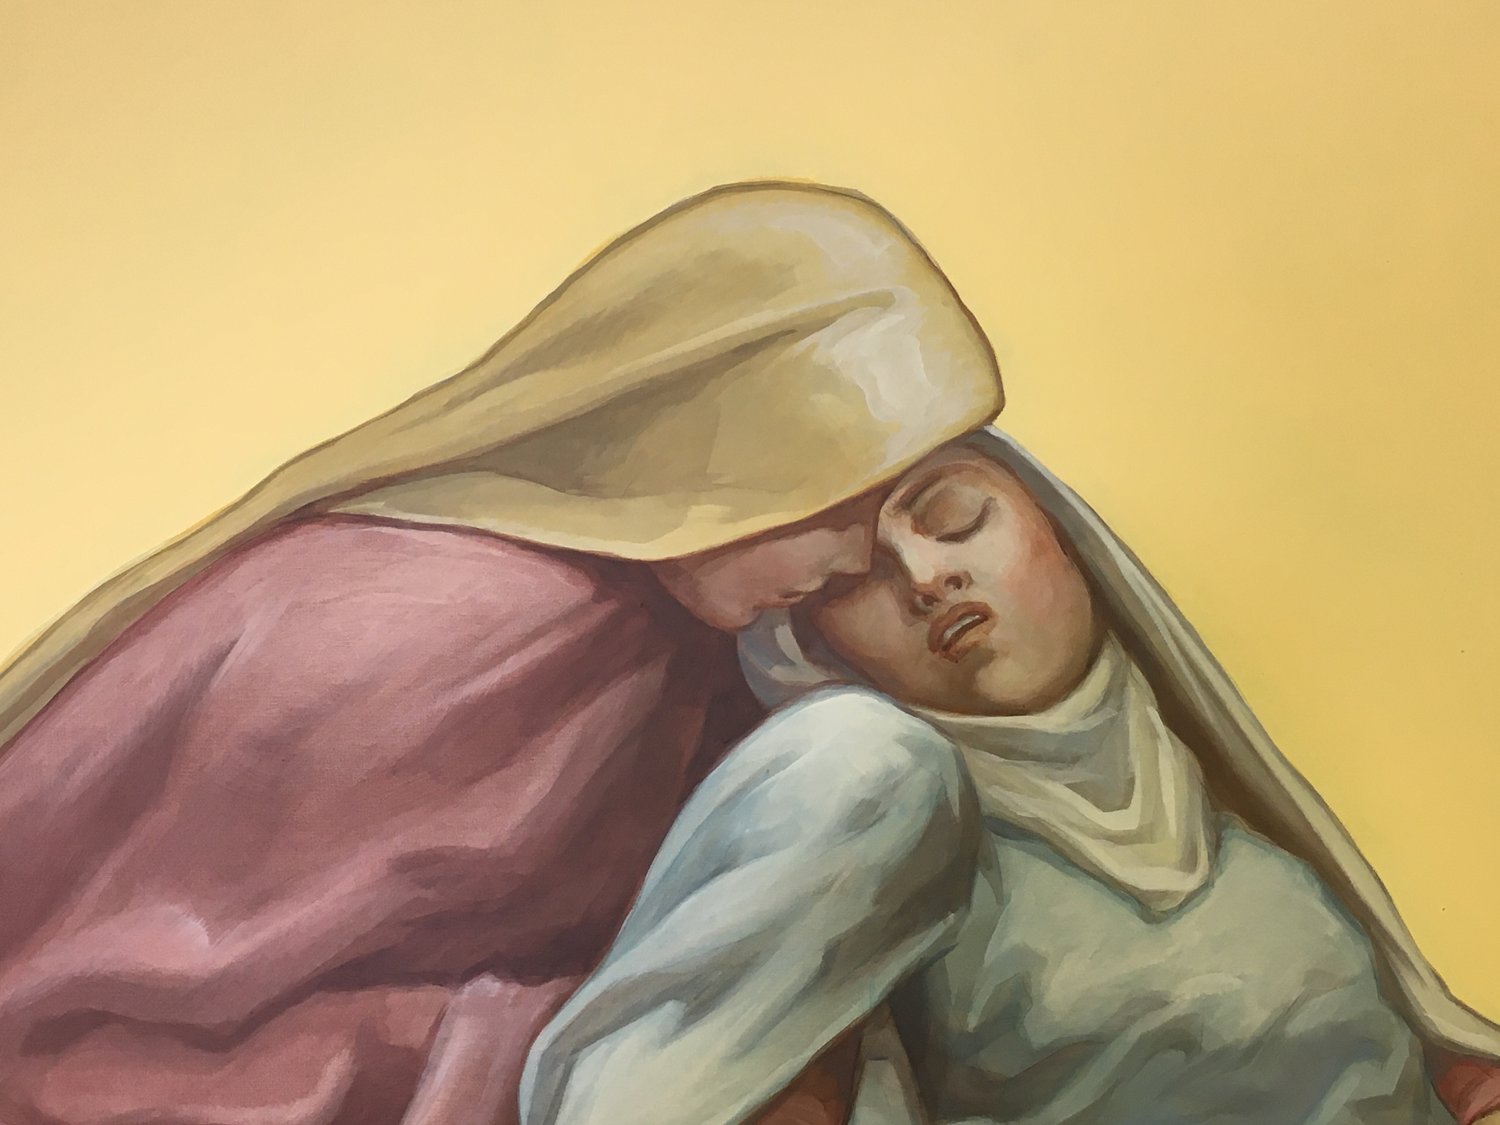 This is the completed image of one of Mary Magdalene comforting the Blessed Mother at the foot of the cross.